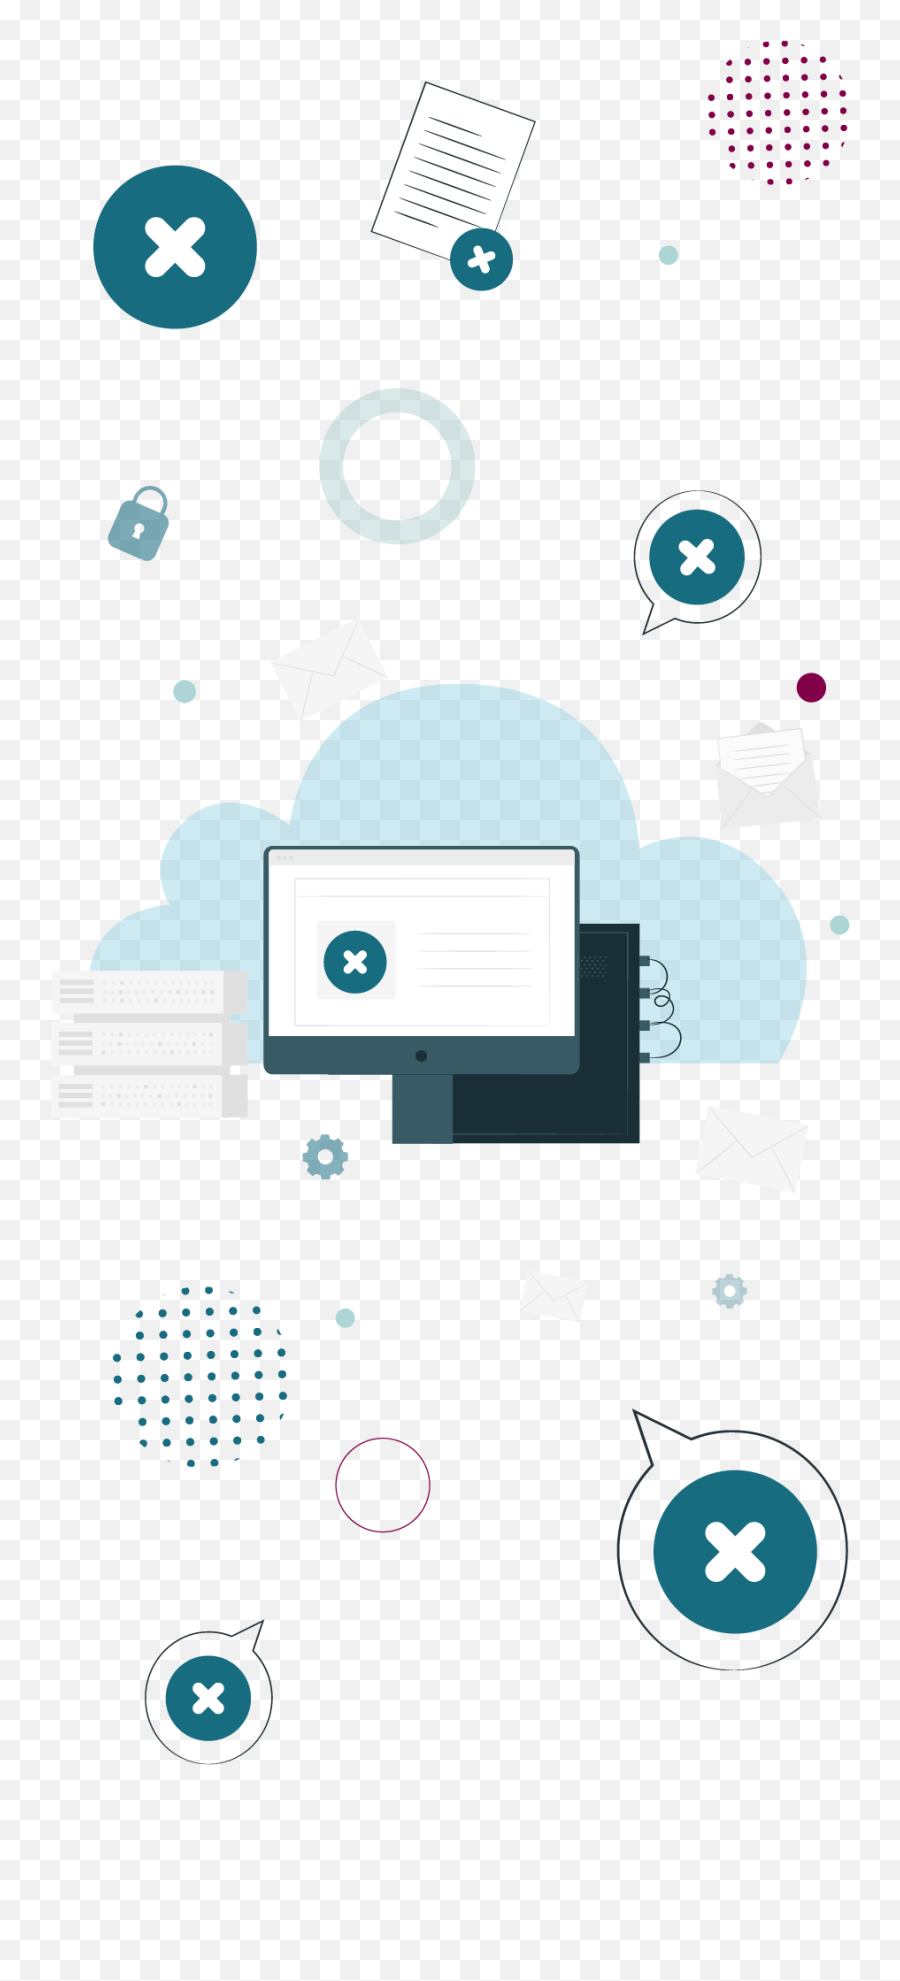 Customer Experience Program - Silverstorm The Dot Png,Know Your Customer Icon